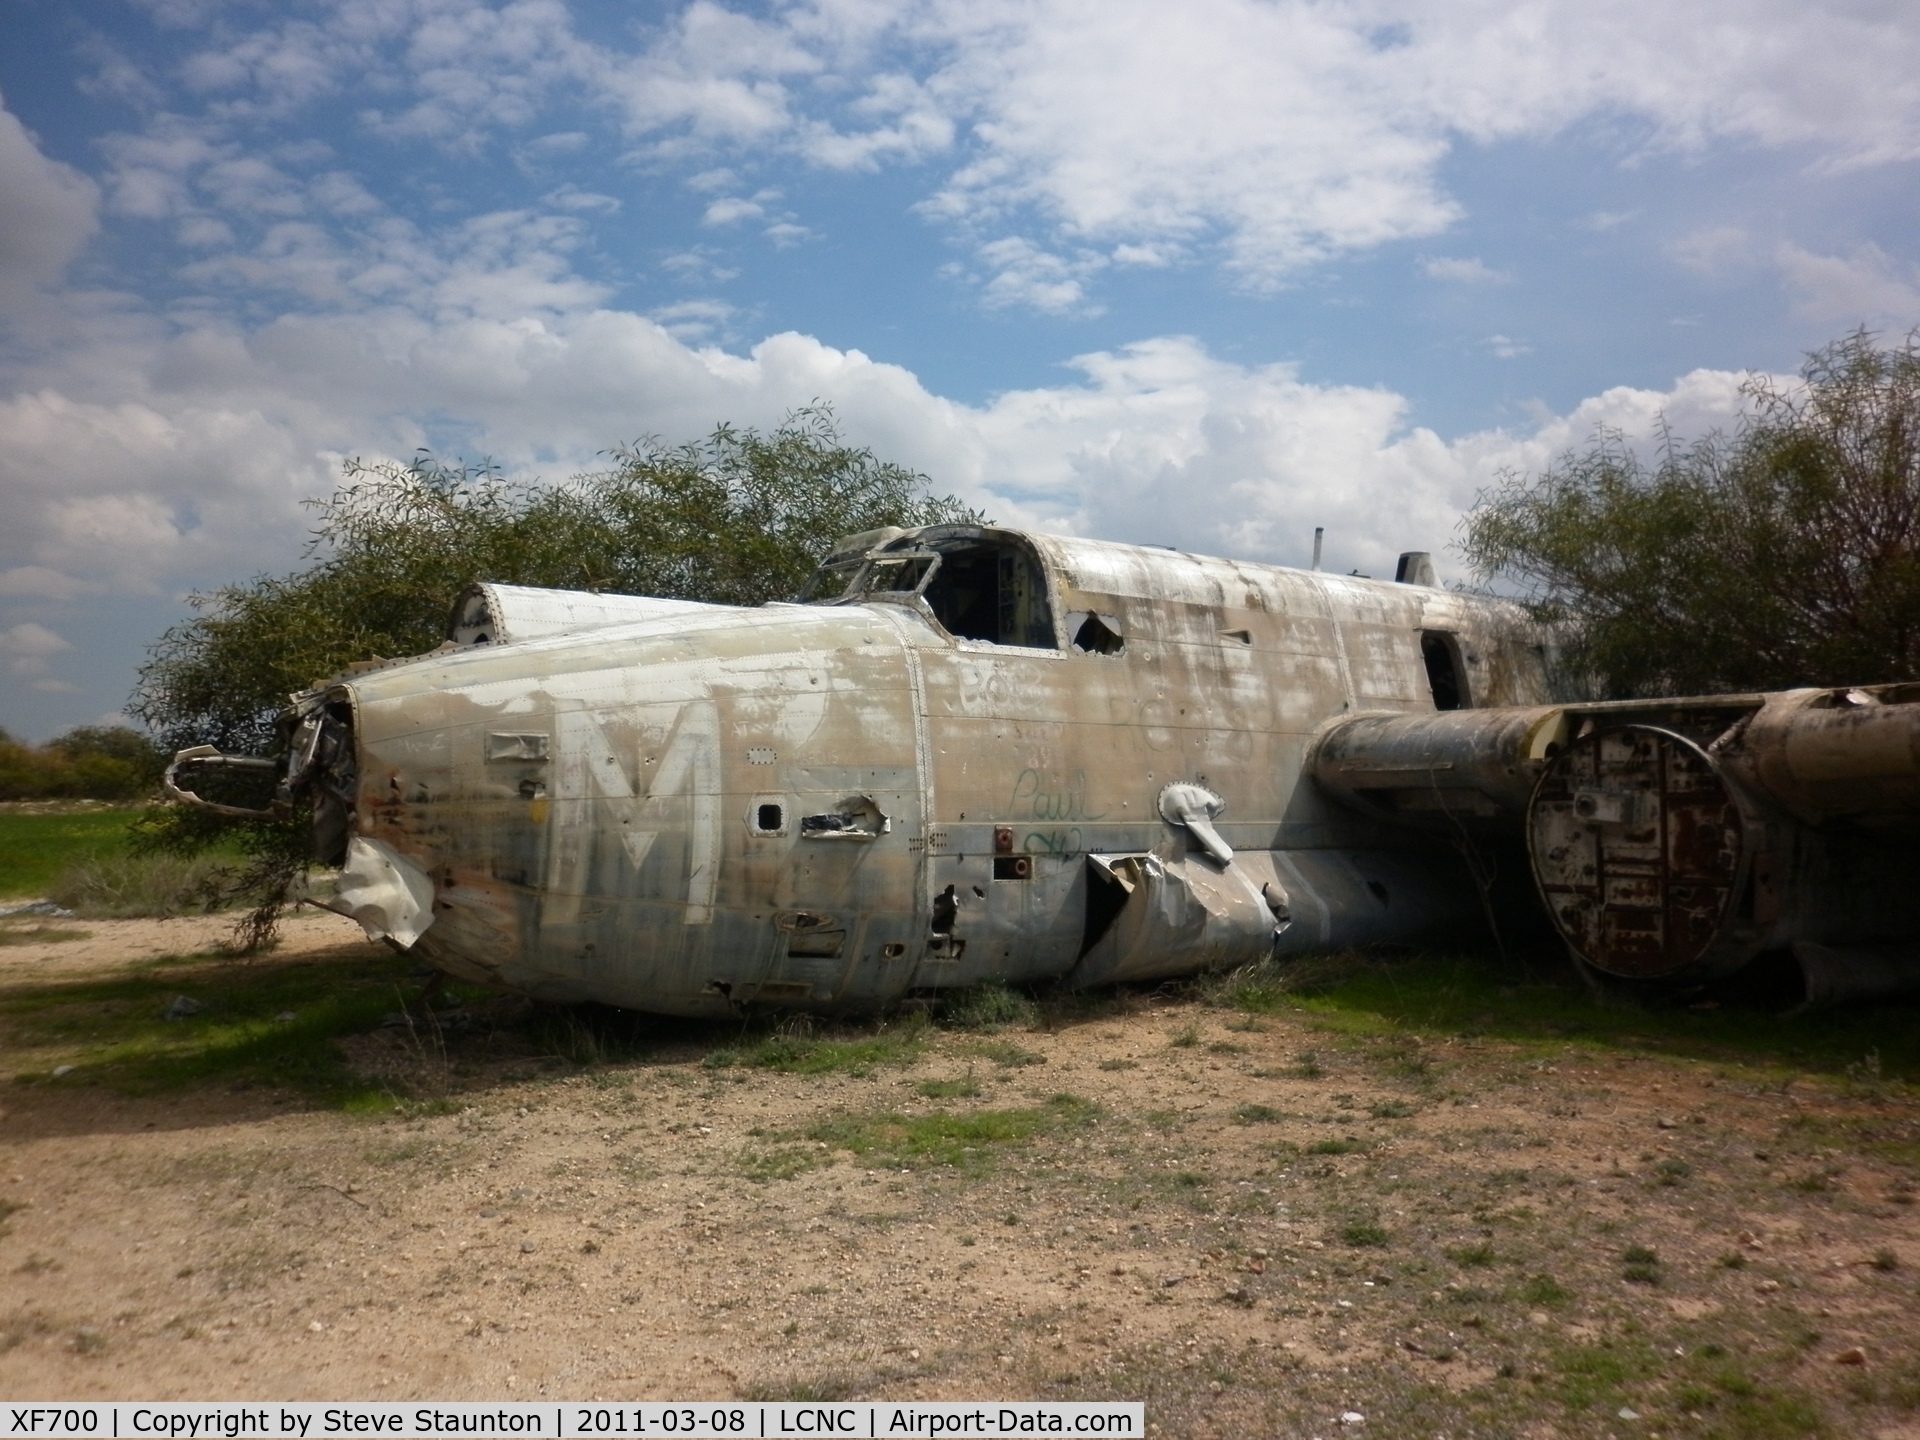 XF700, 1958 Avro 696 Shackleton MR.3/3 C/N Not found XF700, Slowly rotting in the Cyprus heat. Please note this aircraft cannot be seen by the public - NIC closed